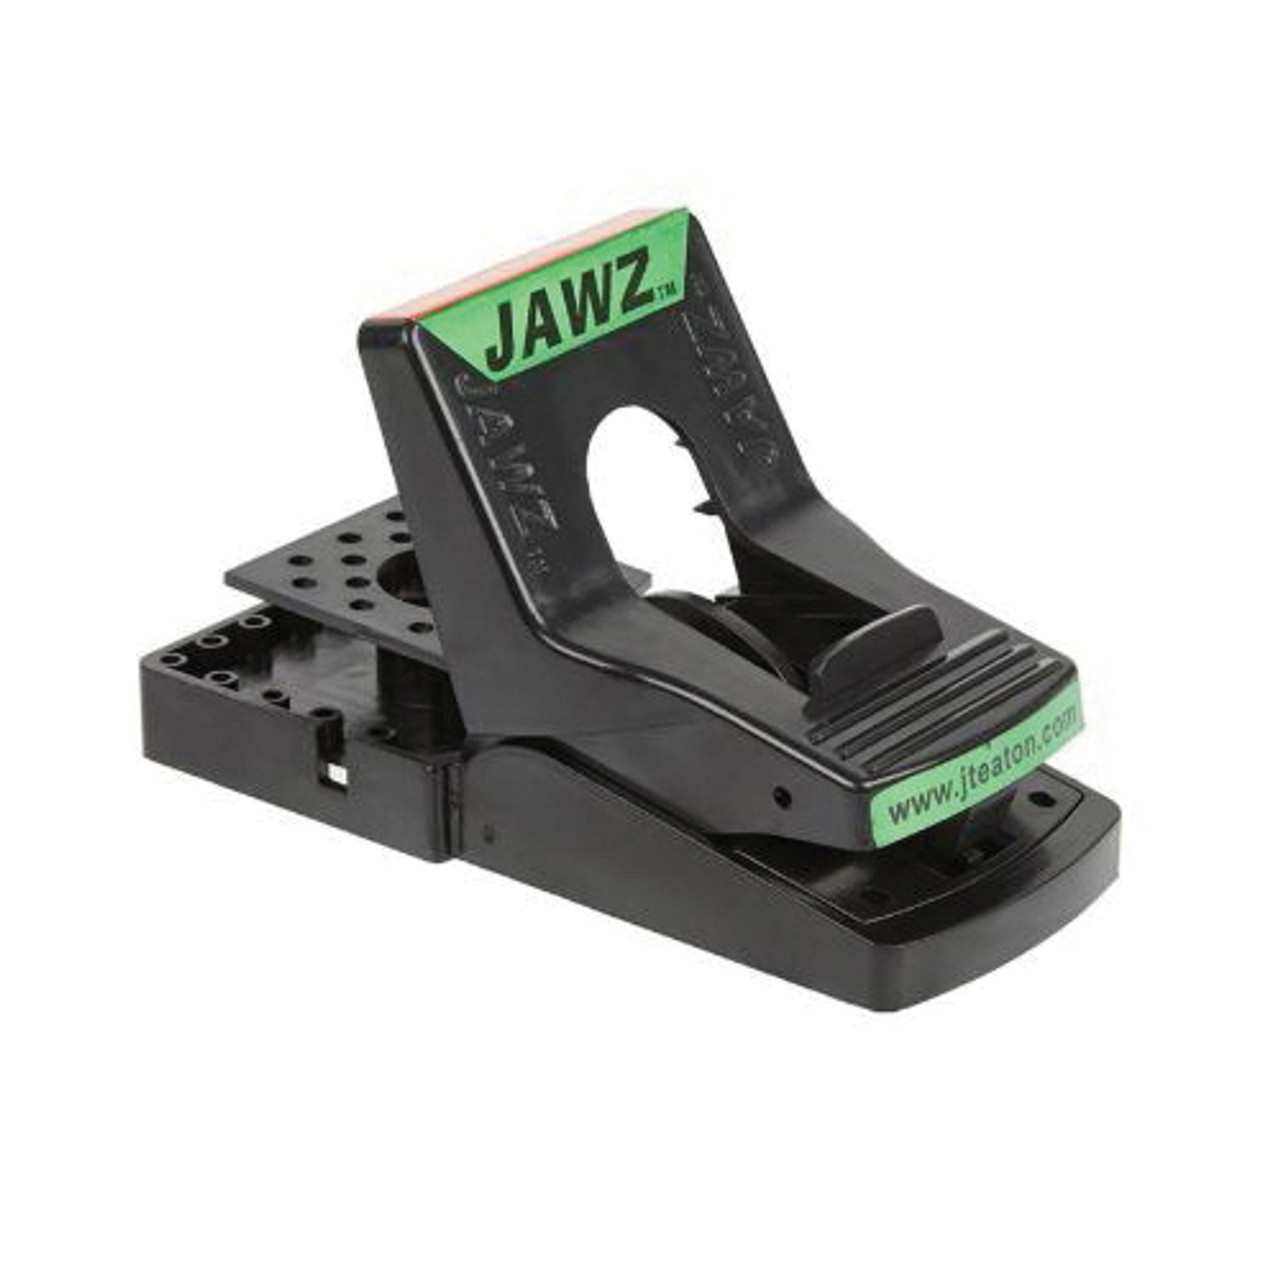 https://cdn11.bigcommerce.com/s-44t8fz8vq4/images/stencil/1280x1280/products/8018/729250/JT_Eaton_JAWZ_Mouse_Depot_Reusable_Covered_Mouse_Trap_3__62921.1640619839.jpg?c=2